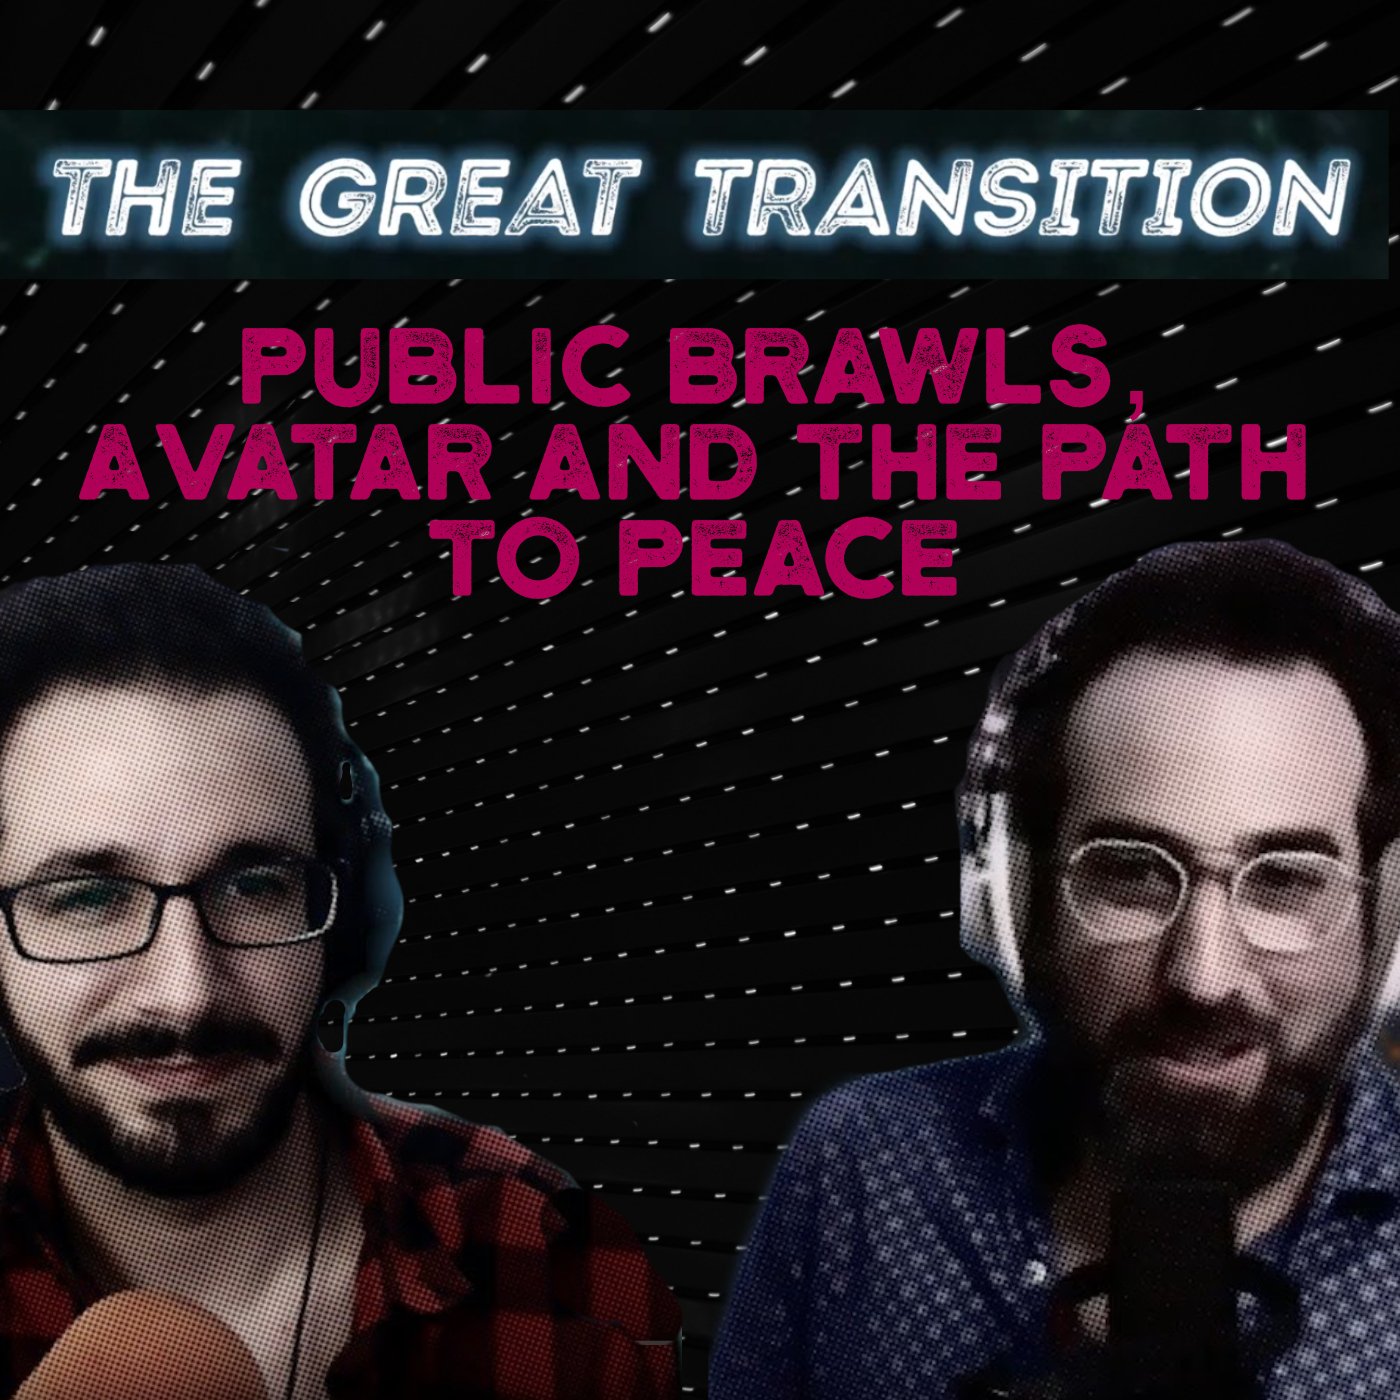 The Great Transition - Public Brawls, Avatar and the Path to Peace